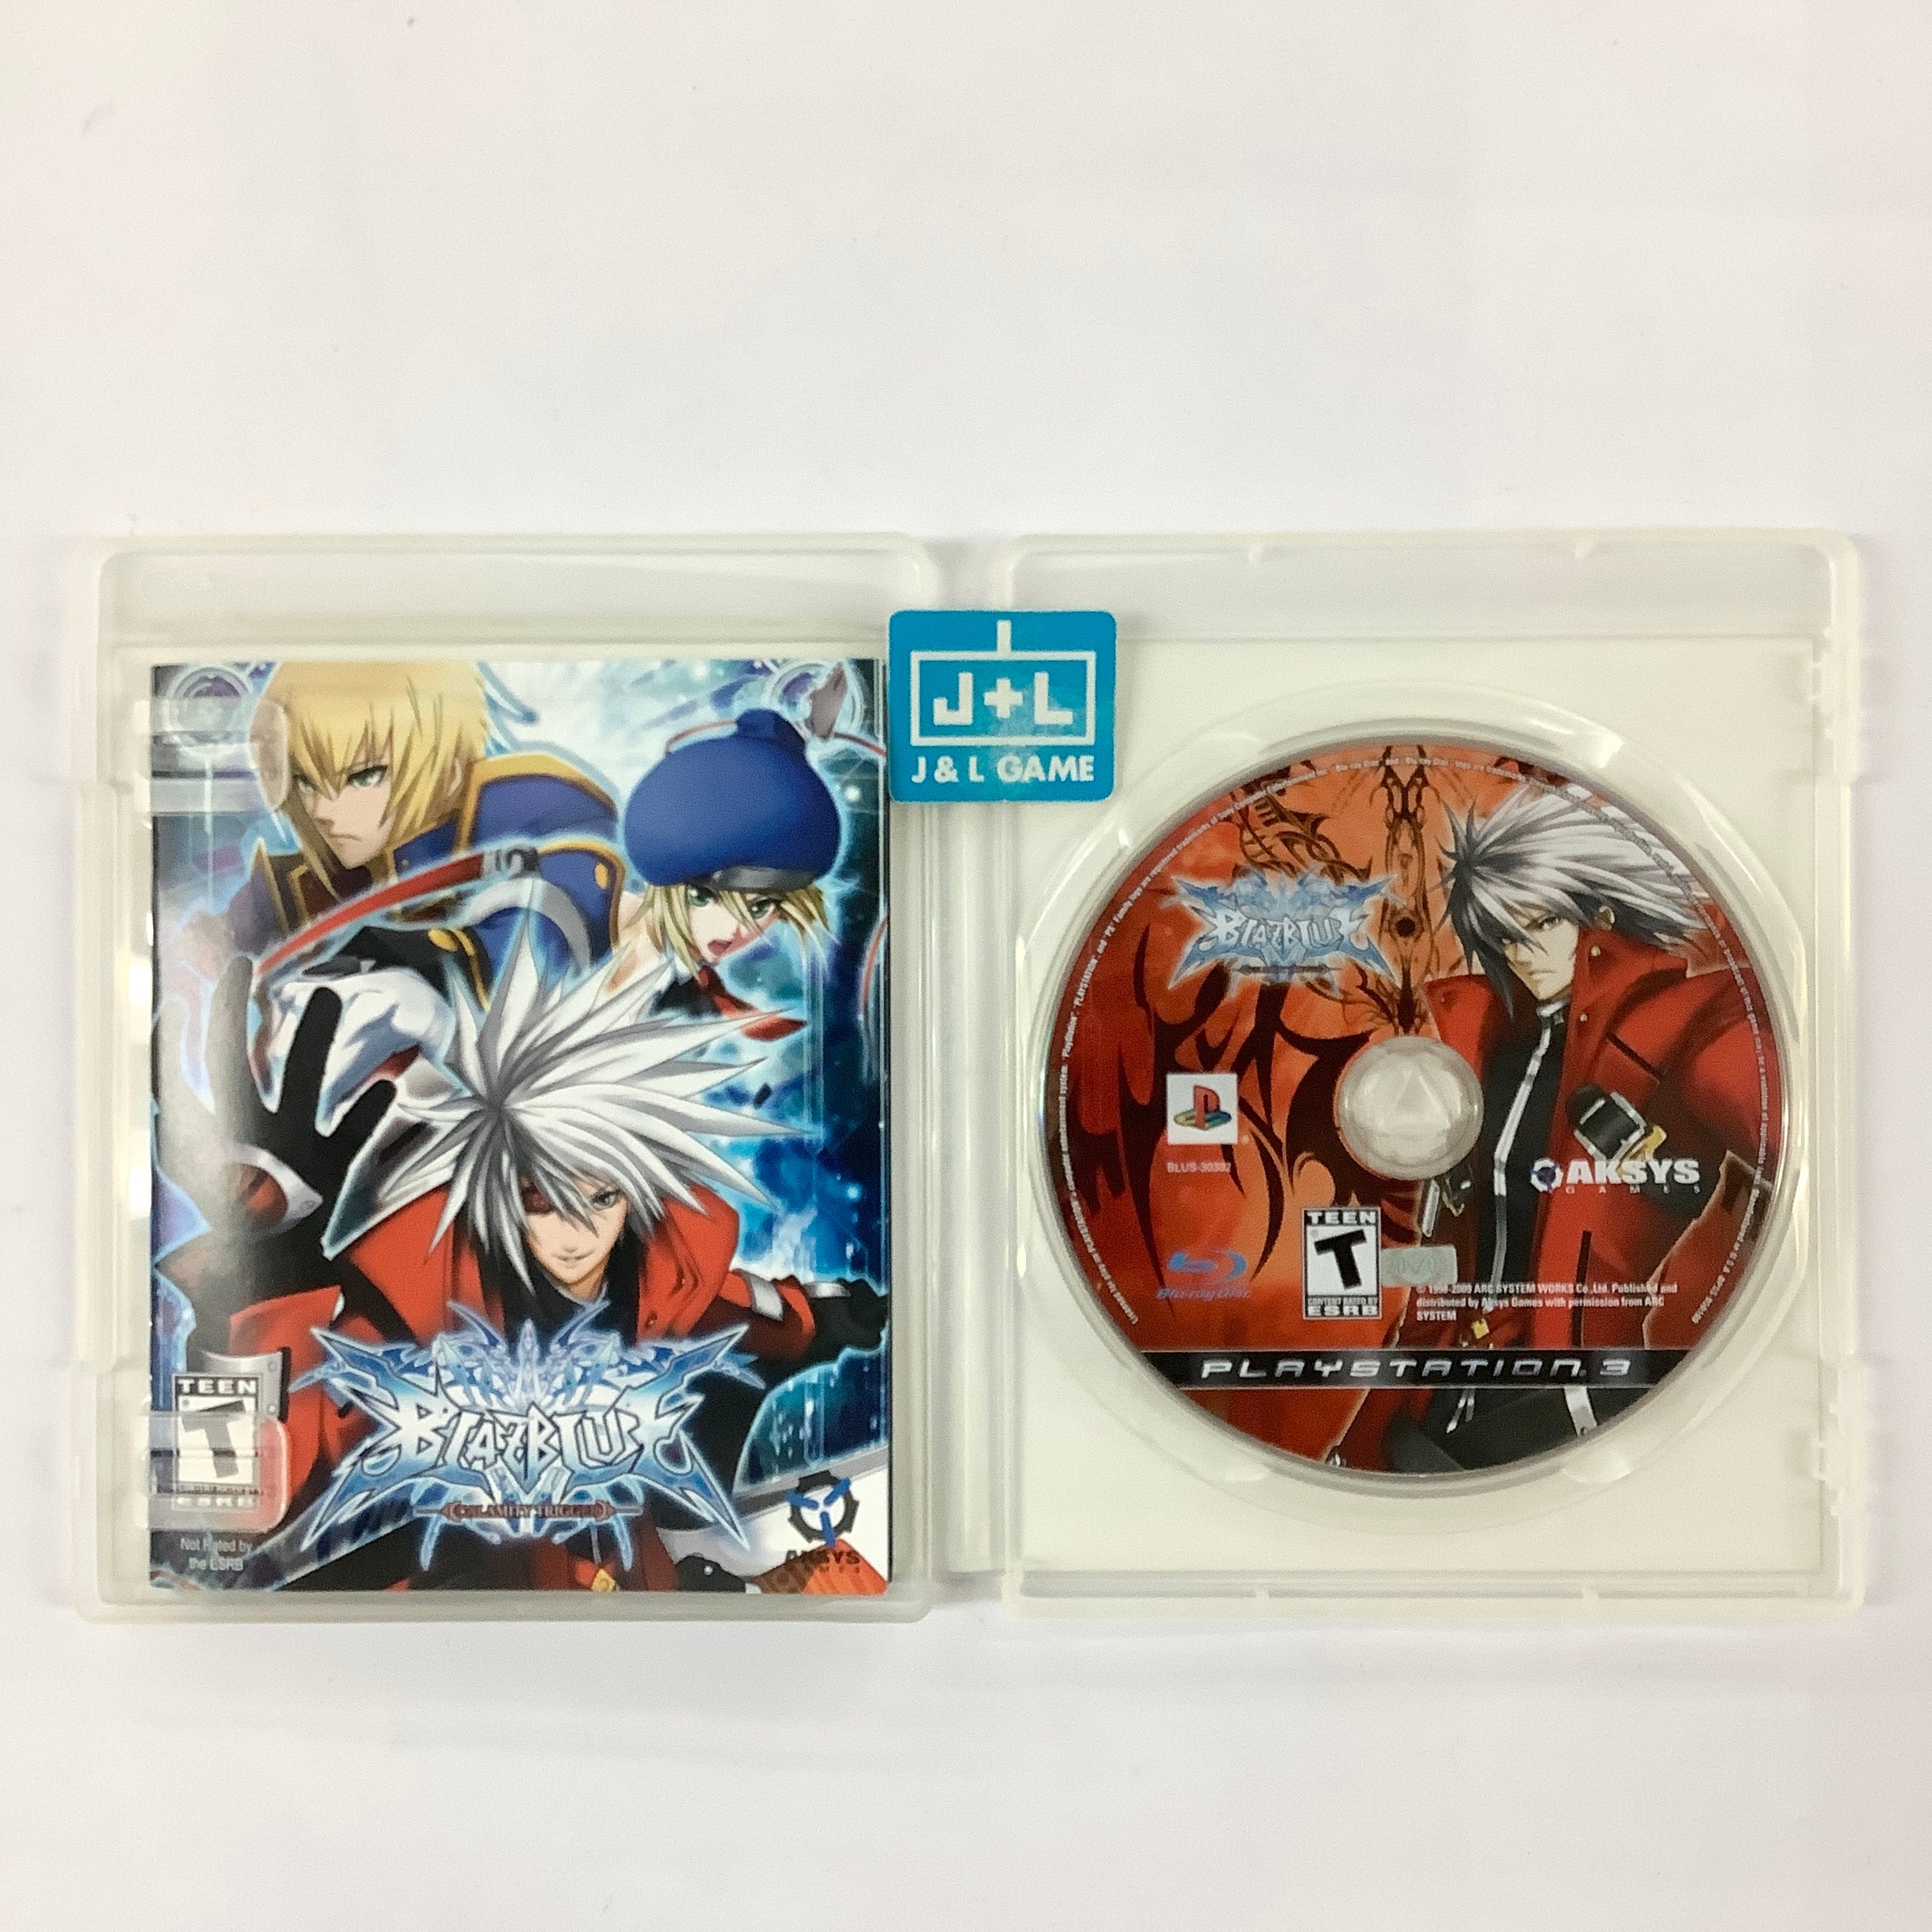 BlazBlue: Calamity Trigger (Limited Edition) - (PS3) PlayStation 3 [Pre-Owned] Video Games Aksys Games   